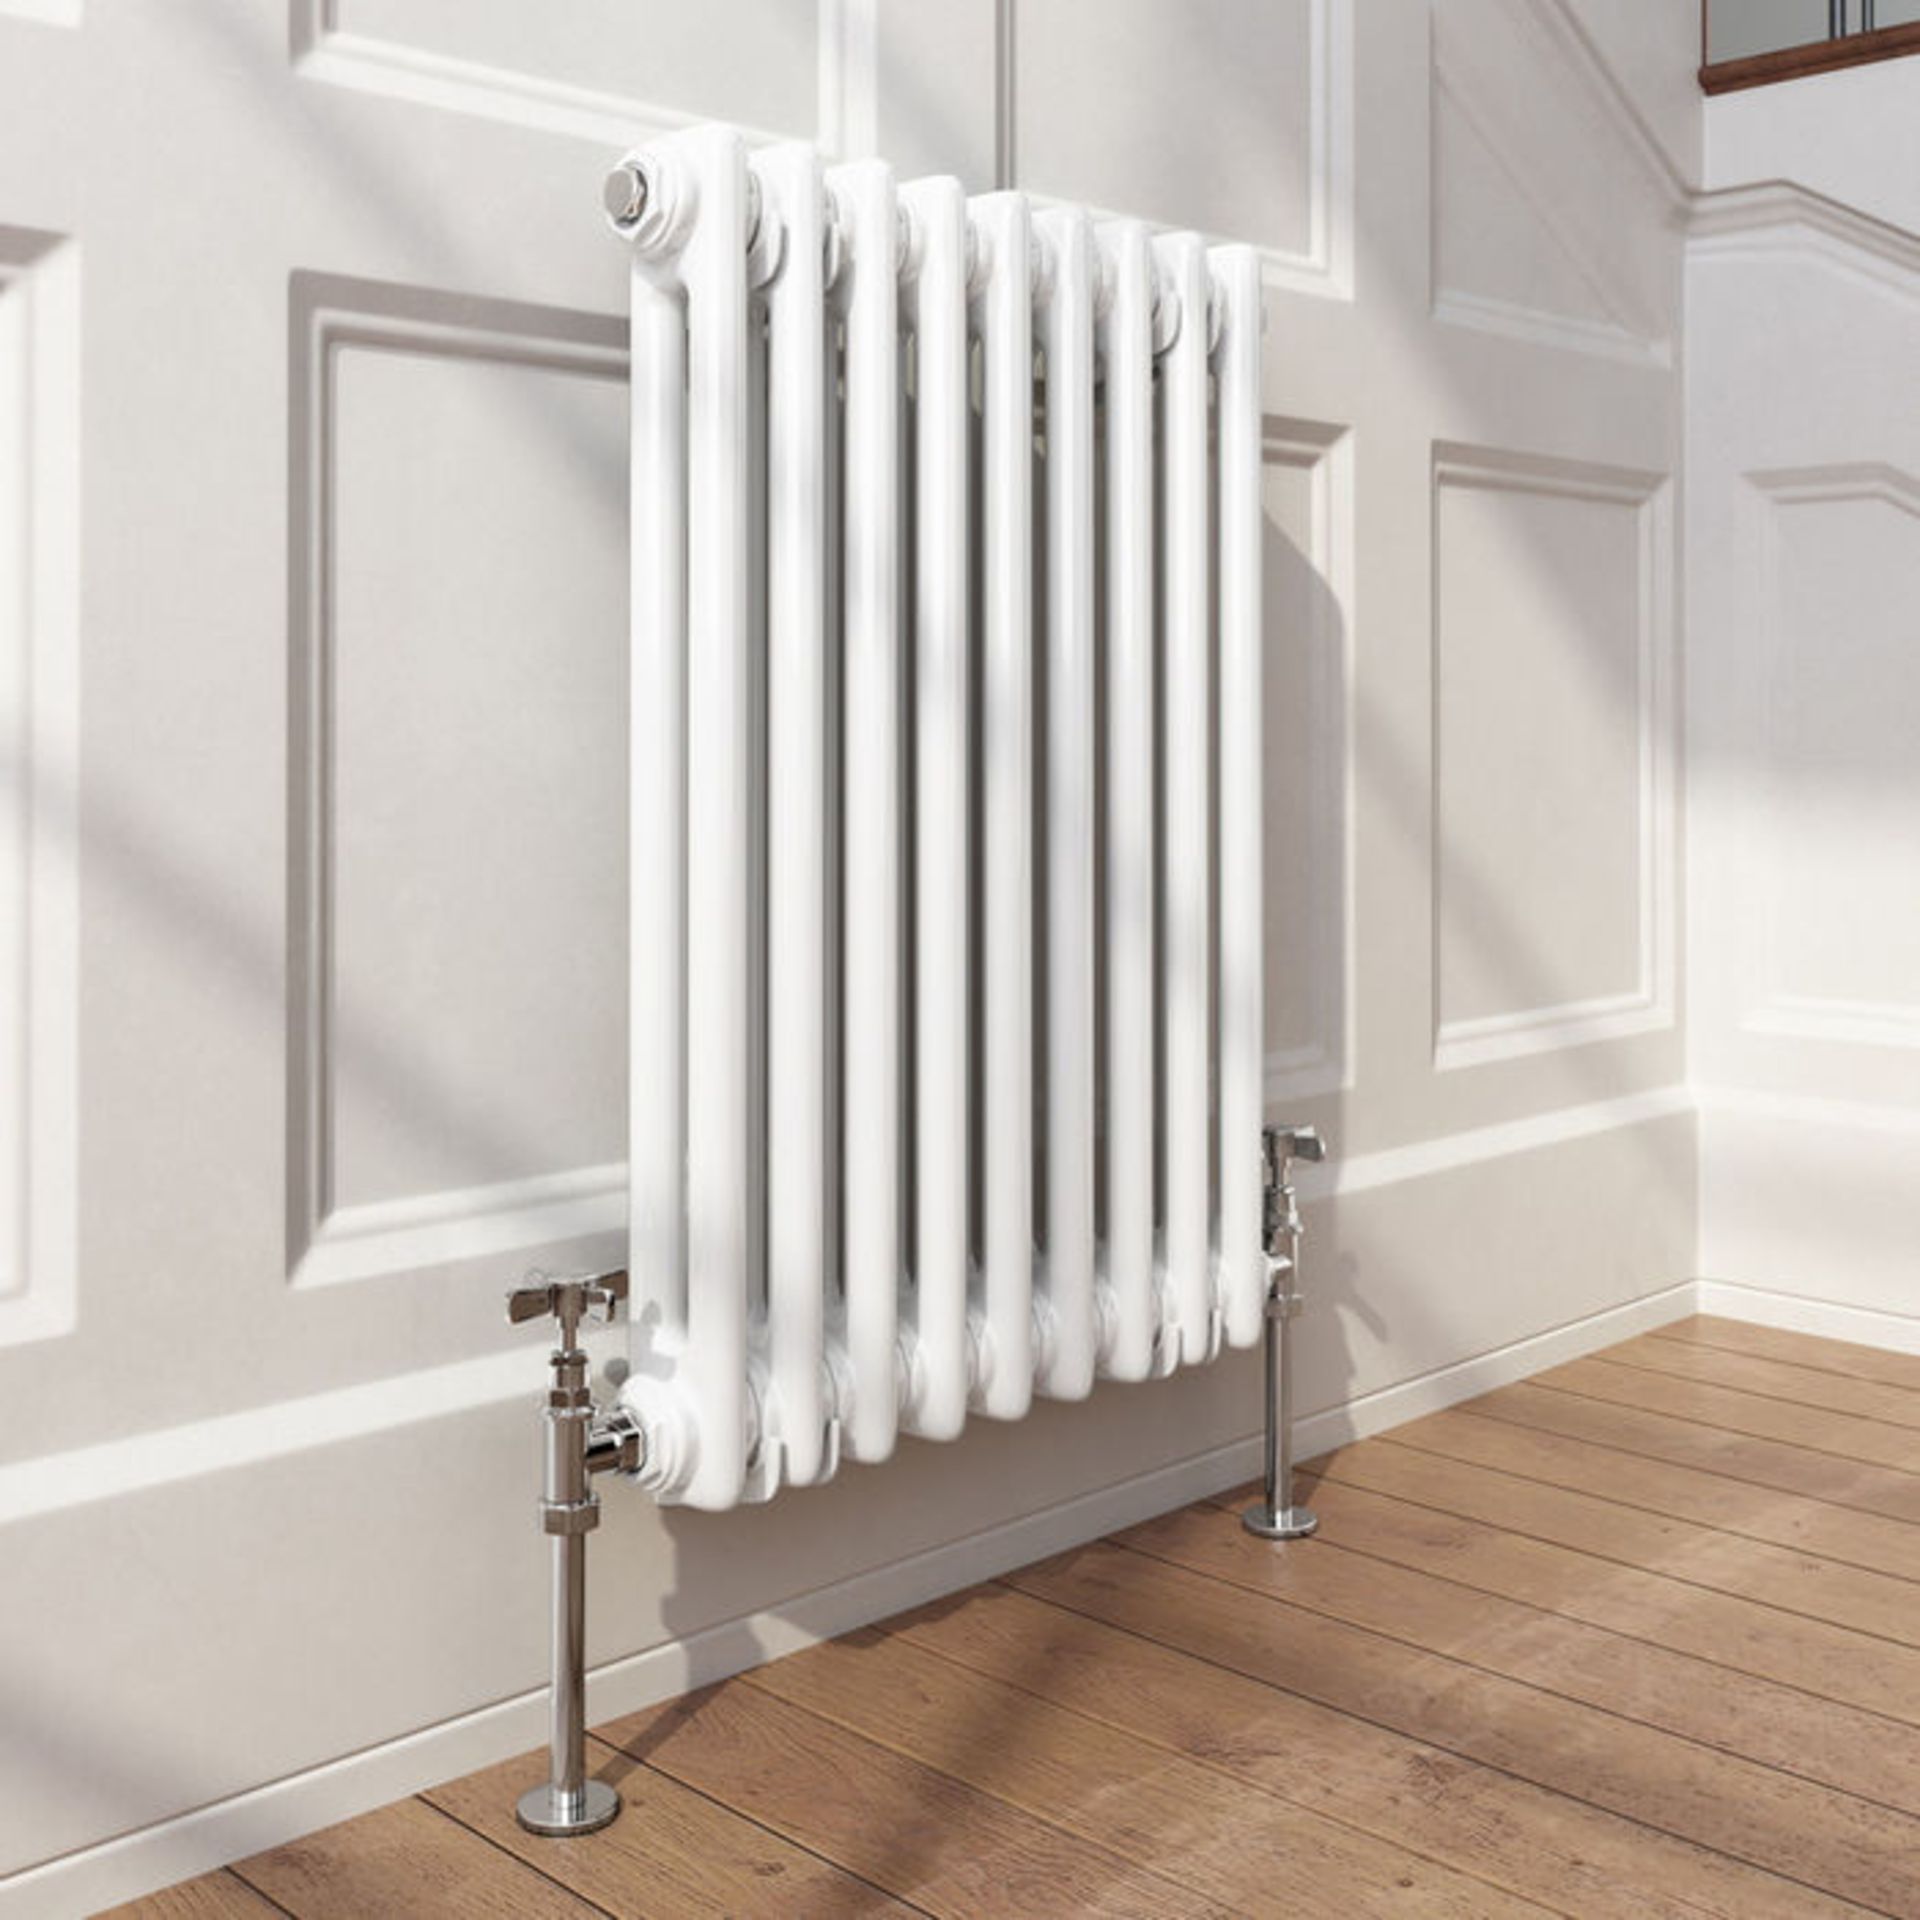 (DW34) 600x420mm White Double Panel Horizontal Colosseum Traditional Radiator. RRP £329.99. Ma... - Image 3 of 4